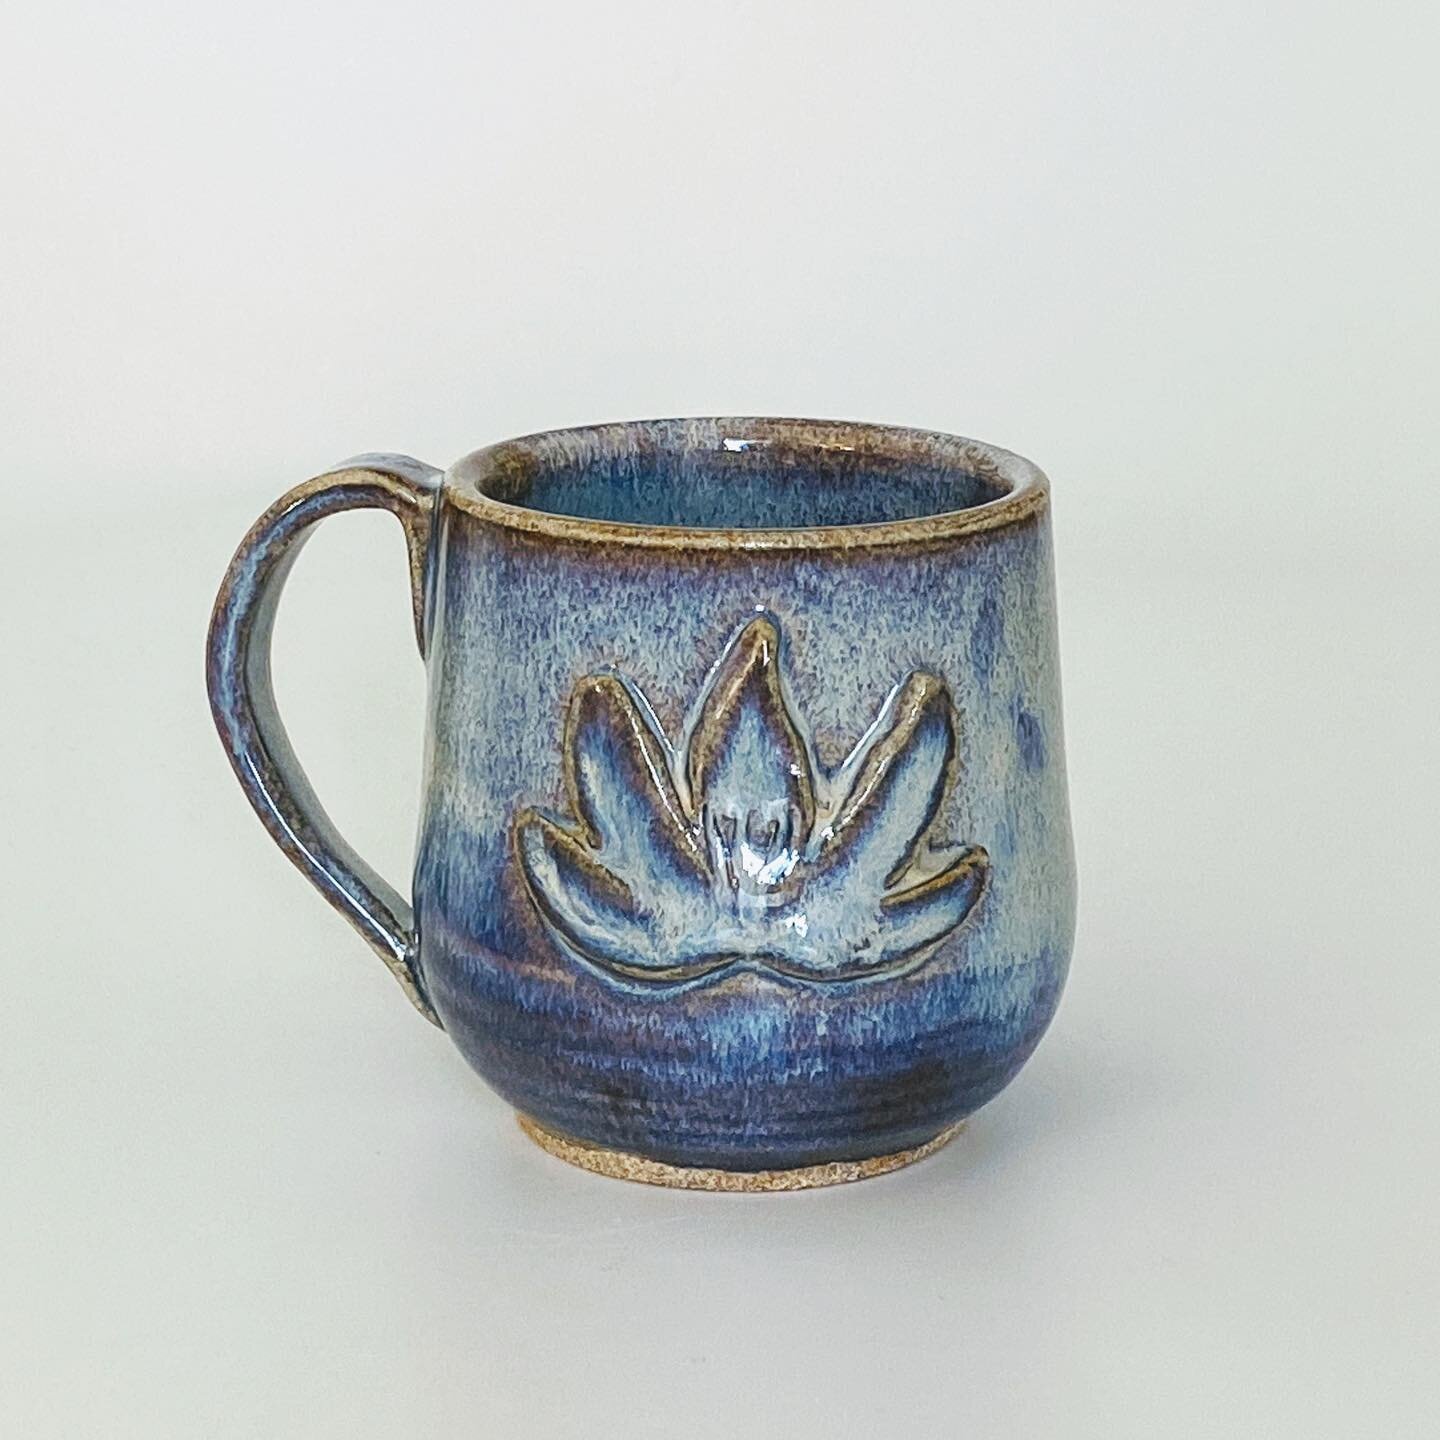 I make more than just mugs, but I&rsquo;ve been on a mug kick for a while! This blue lotus mug will be available next week just in time for @crafthermarket✨
.
.
.
.
.
.
#ceramics #pottery #ceramicmugs #mugshotmonday #crafther #crafthermarket #handmad